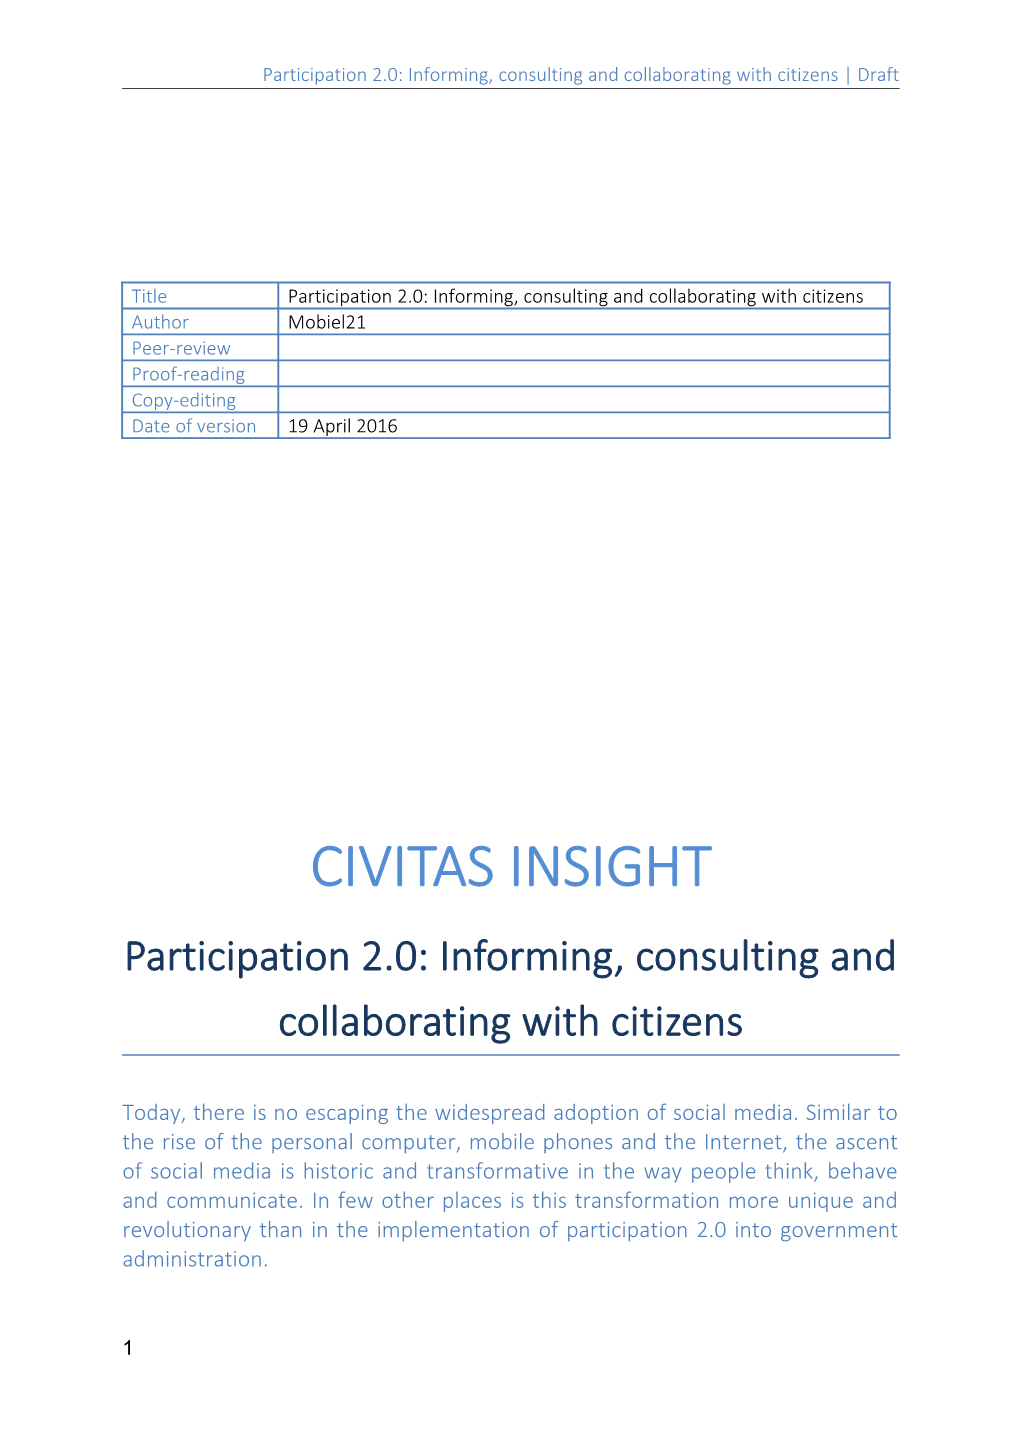 Participation 2.0: Informing, Consulting and Collaborating with Citizens Draft